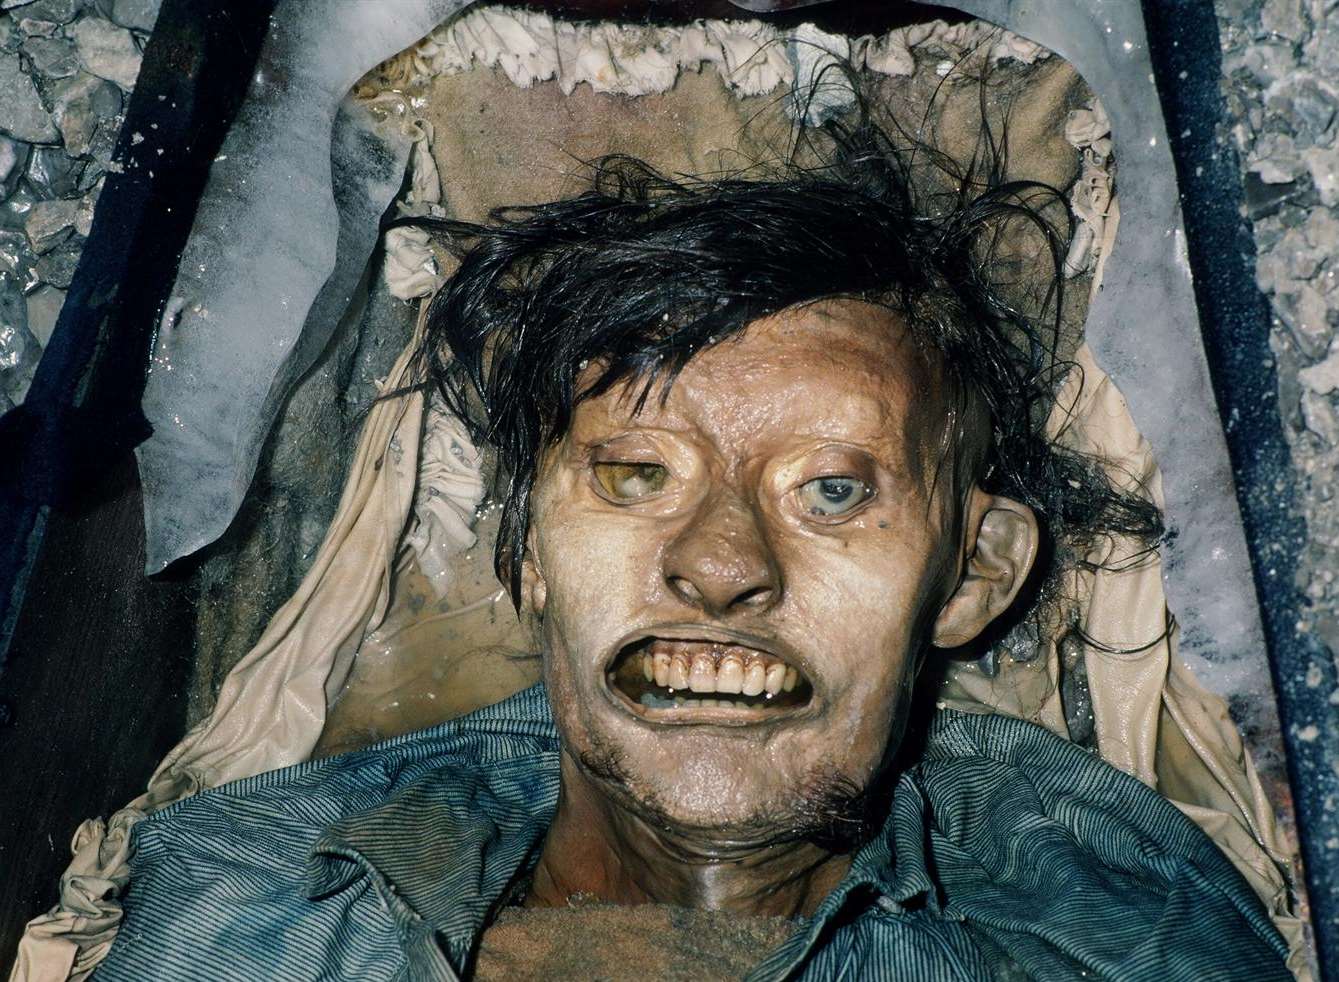 Thomas Hartnell's body was preserved in recognisable condition by the permafrost in his resting place in the Canadian Arctic